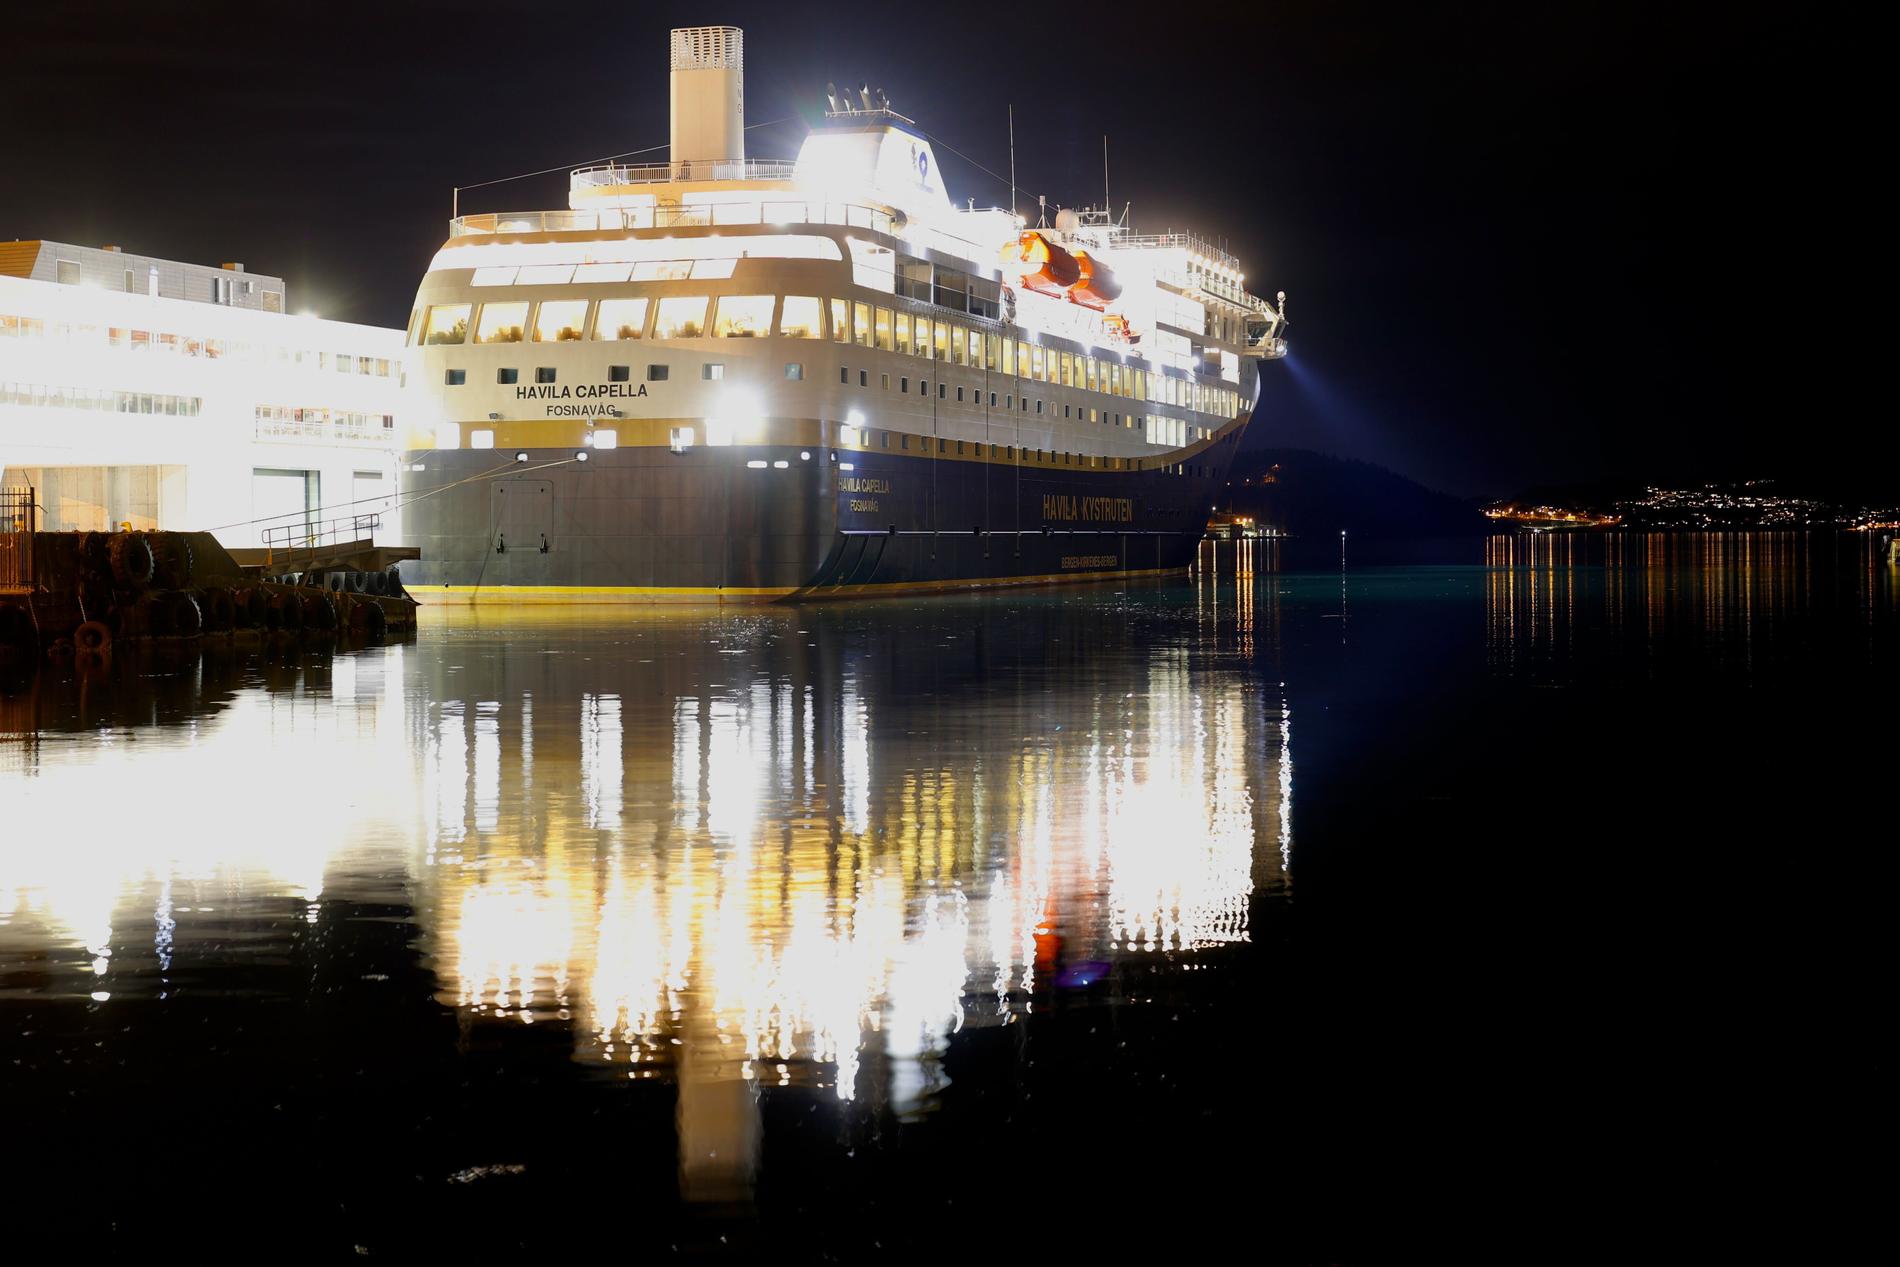 Passenger ship “Havila Capella” stranded in Bergen due to sanctions against Russia